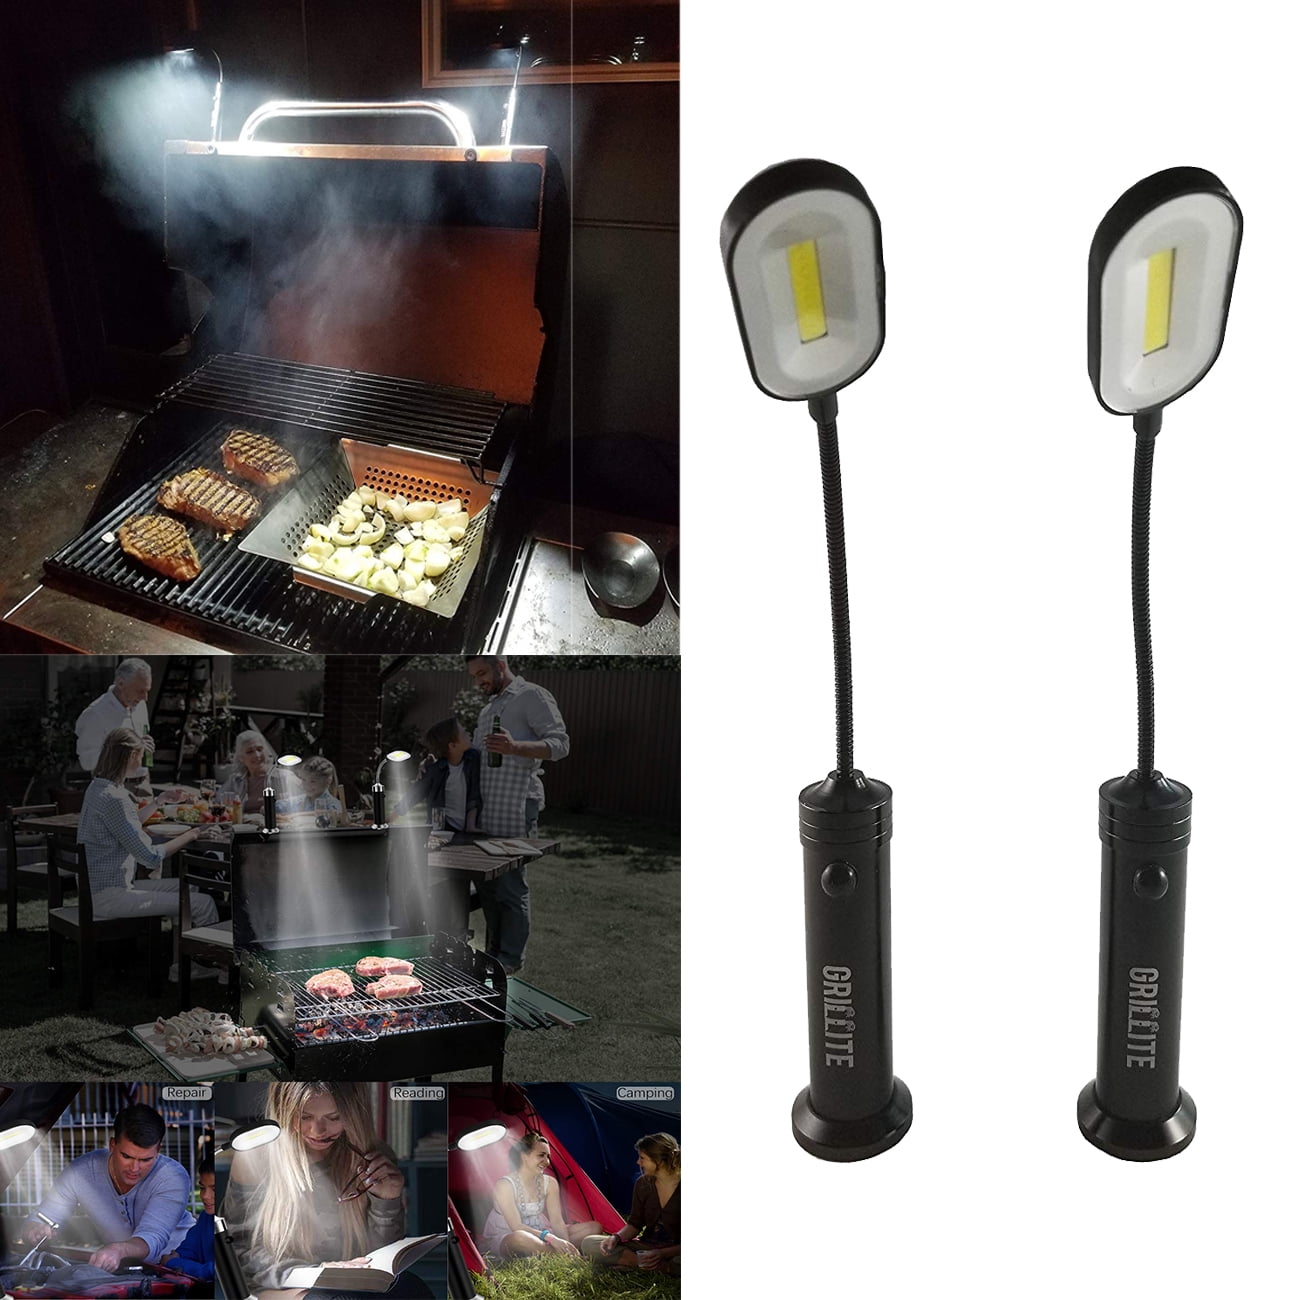 9 LED Lamp Bright Outdoor Grill Barbecue Light Camping Night BBQ Picnic Lights 